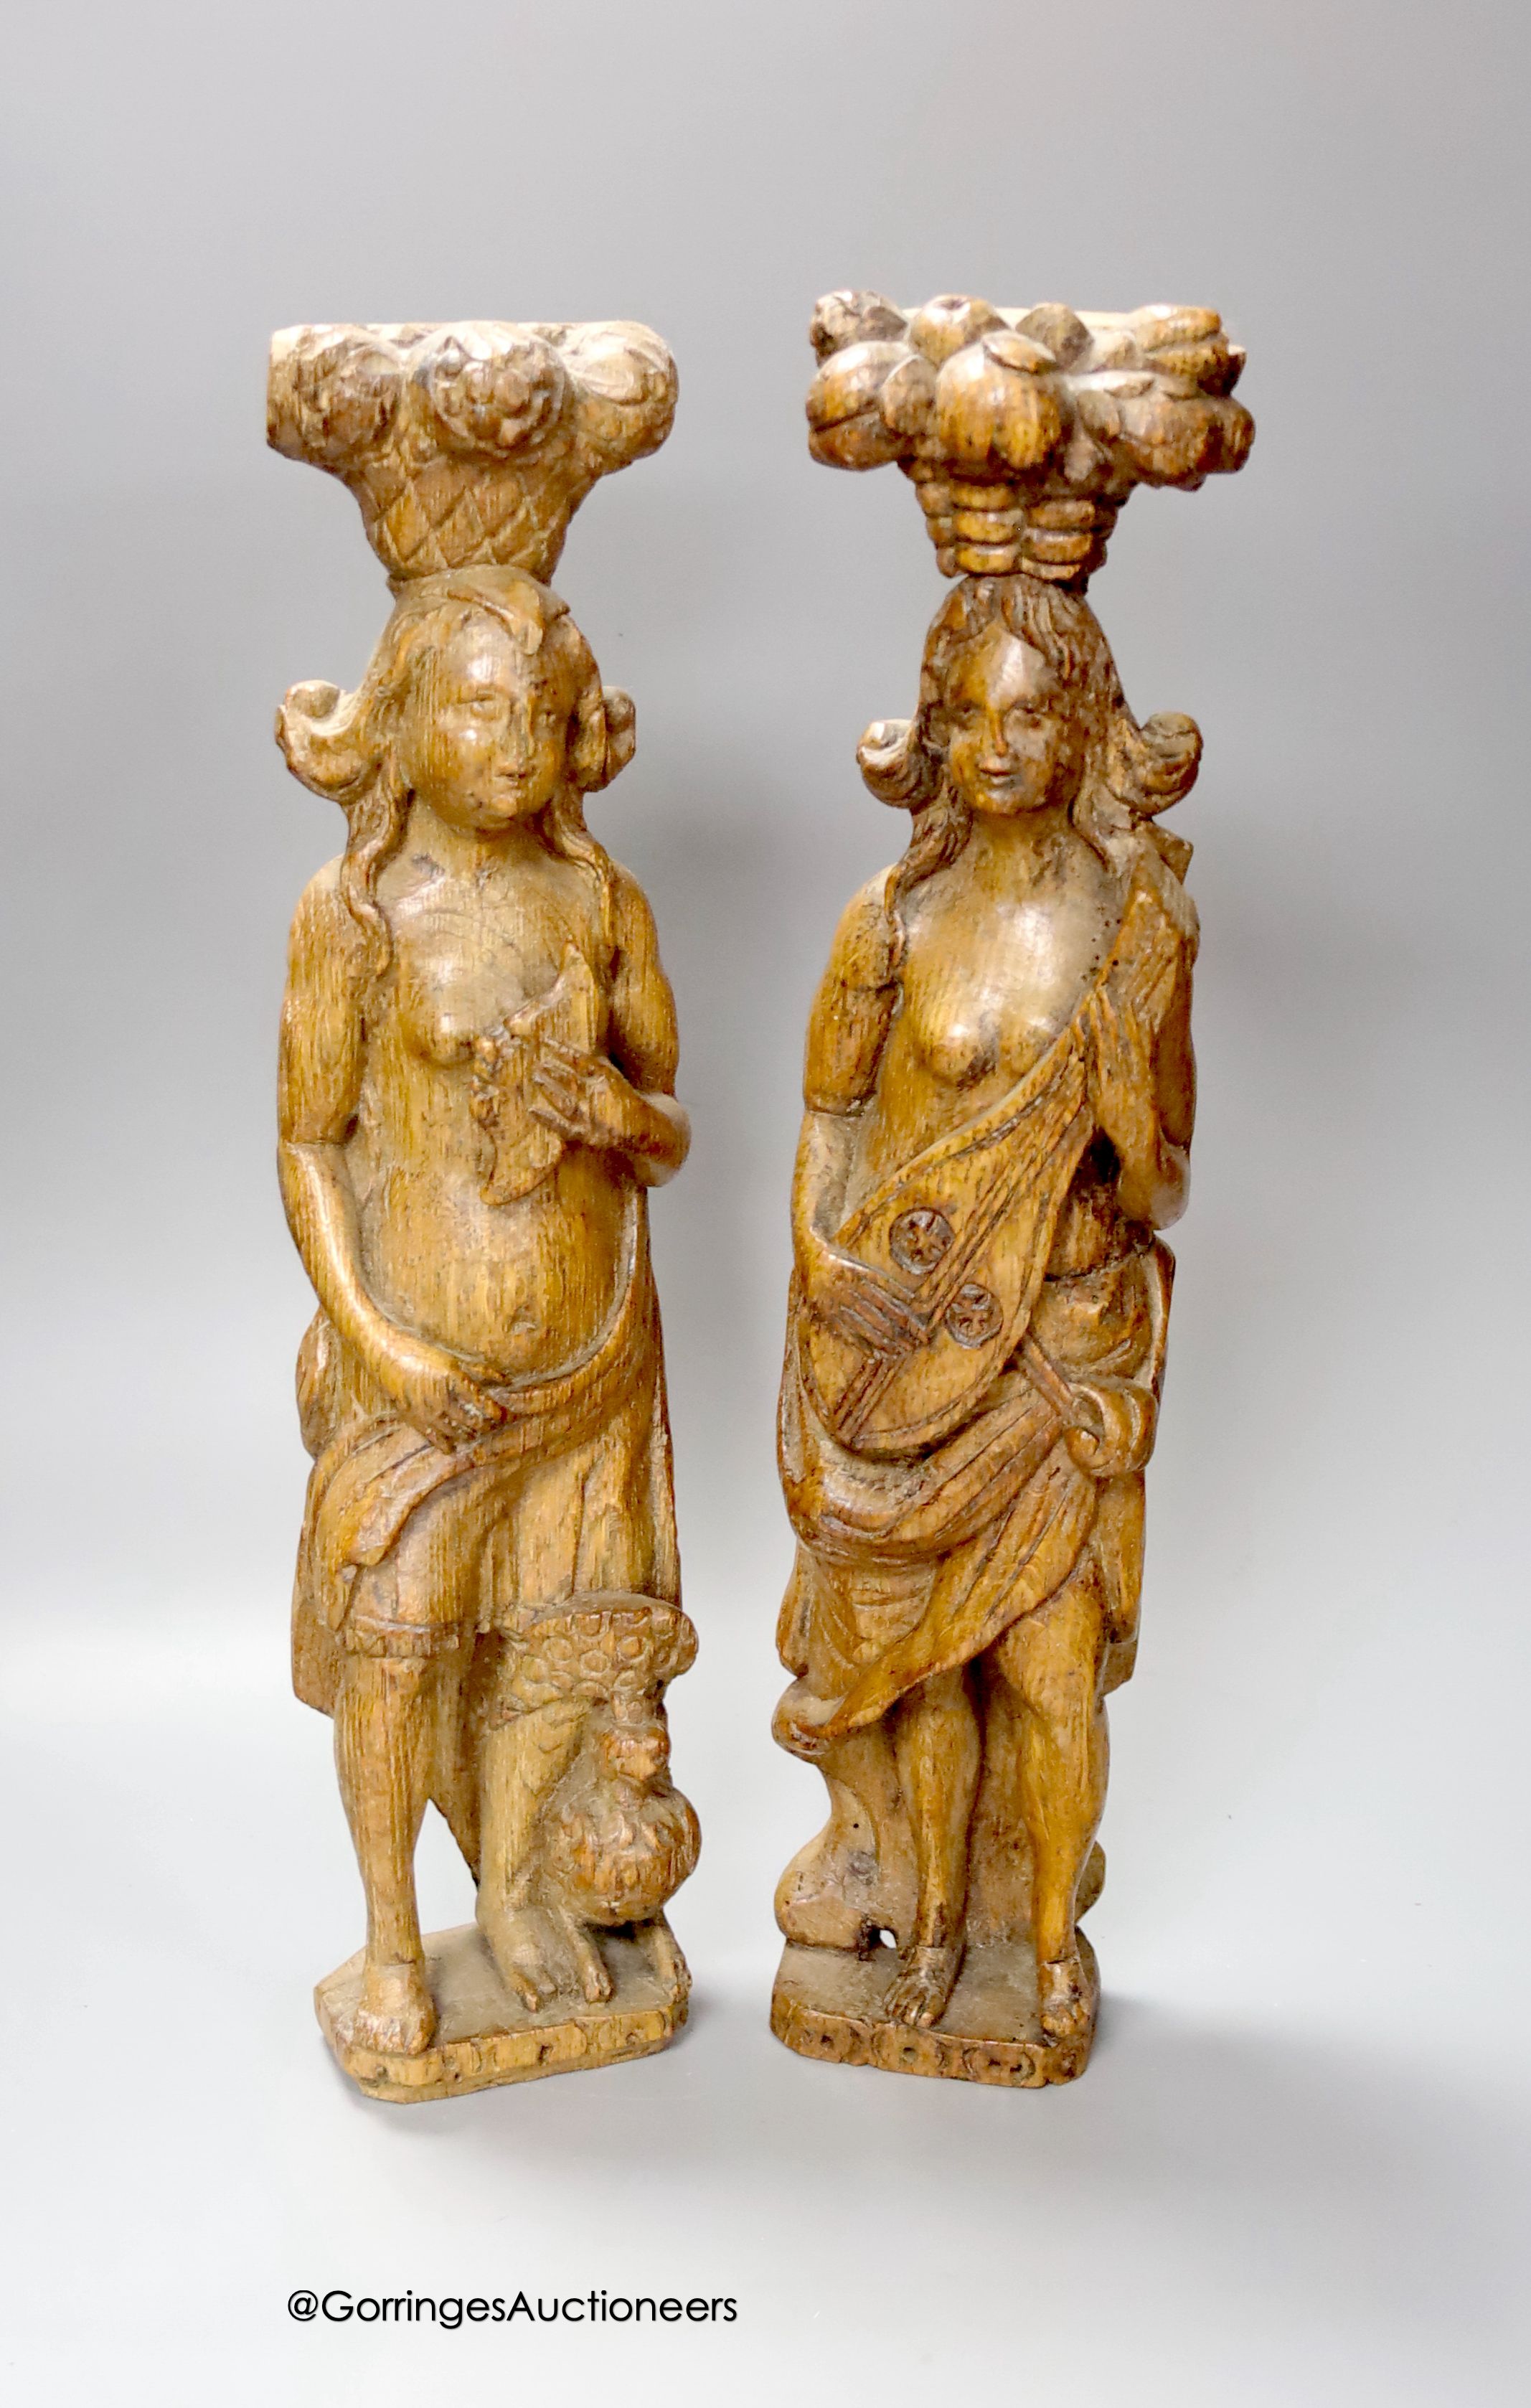 A pair of 17th century carved oak figures 41cm